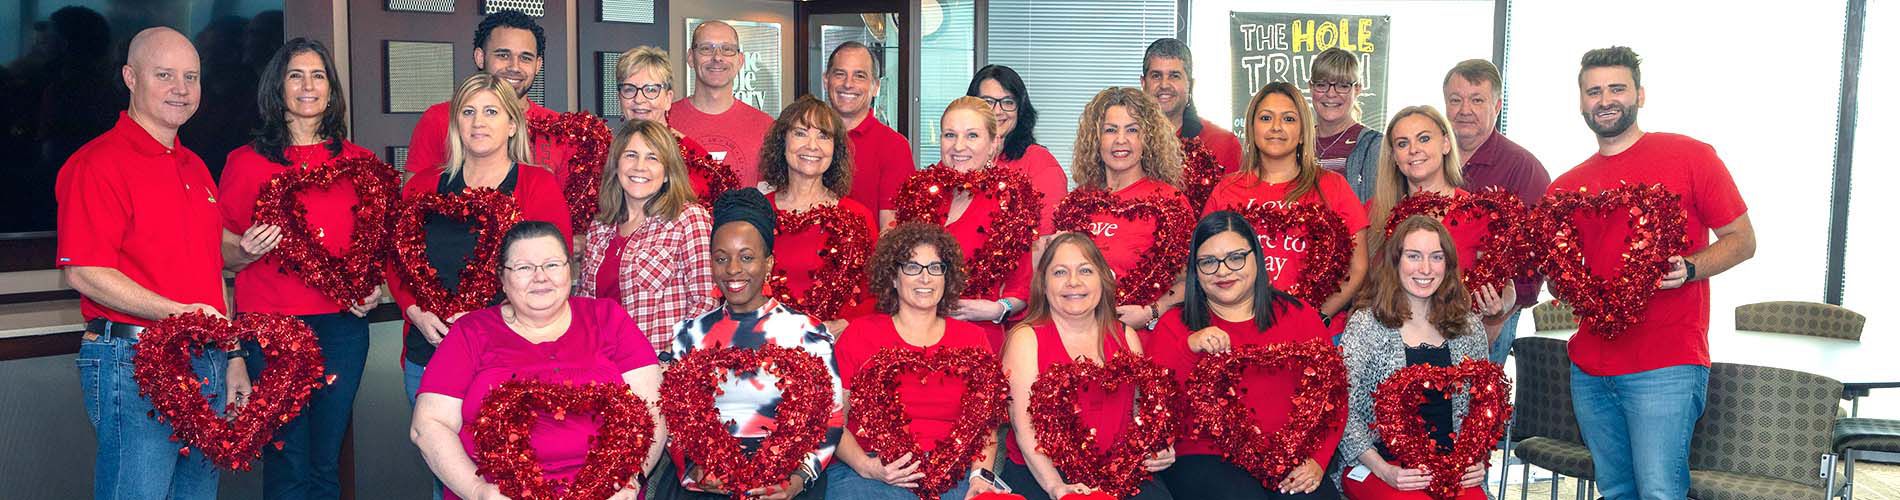 Employees smiling for a group picture on Wear Red Day for the American Heart Association.